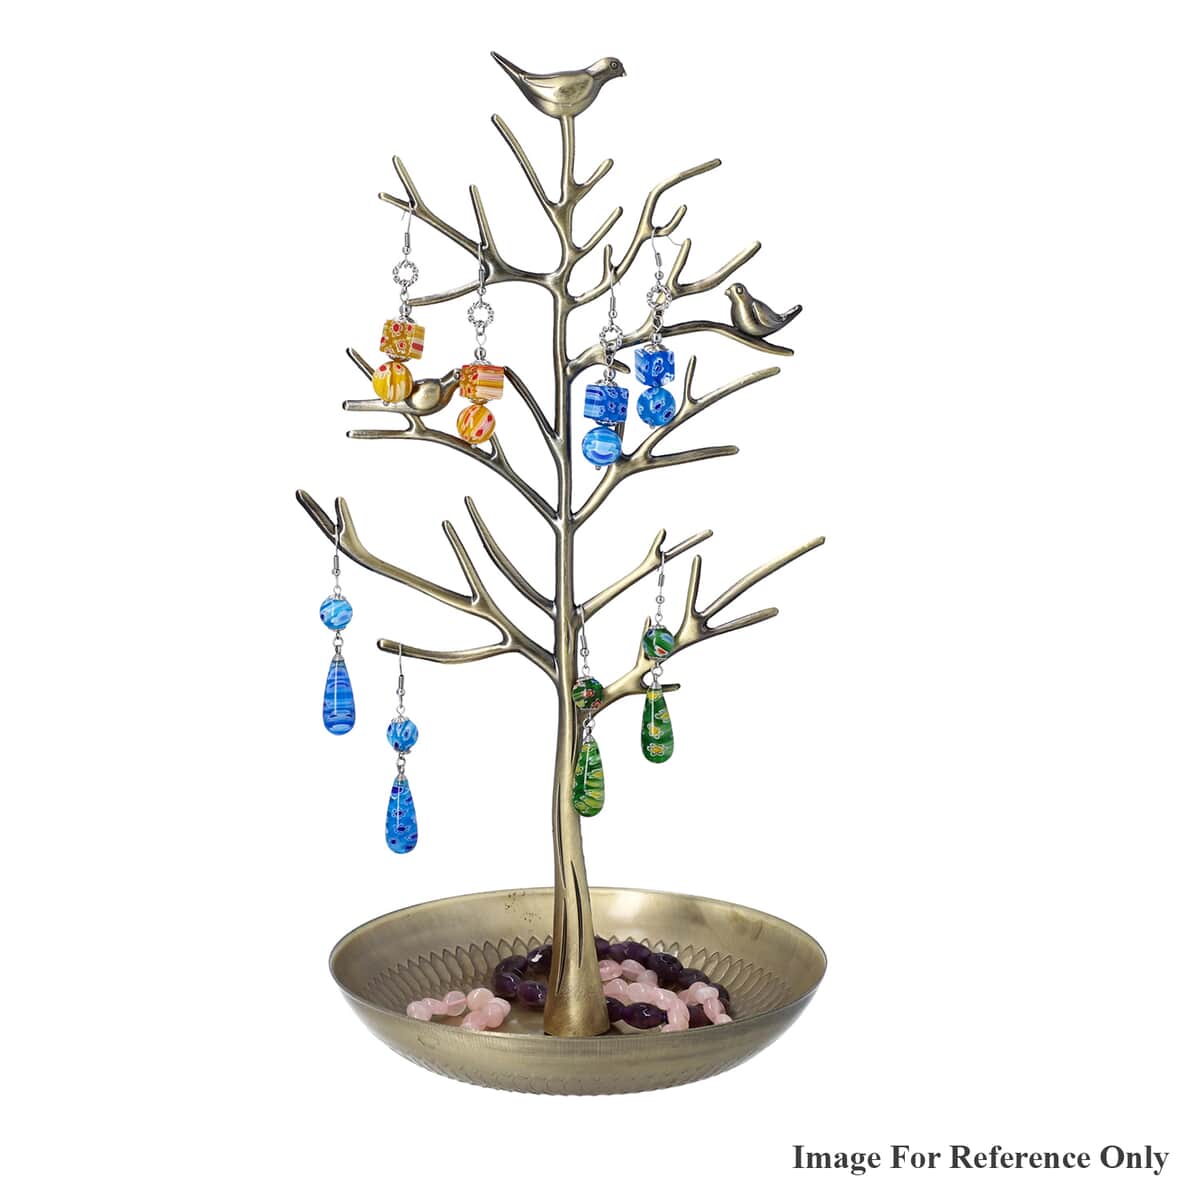 Antique Birds in Tree Jewelry Display Stand - Black (5.9"x11.8") image number 3